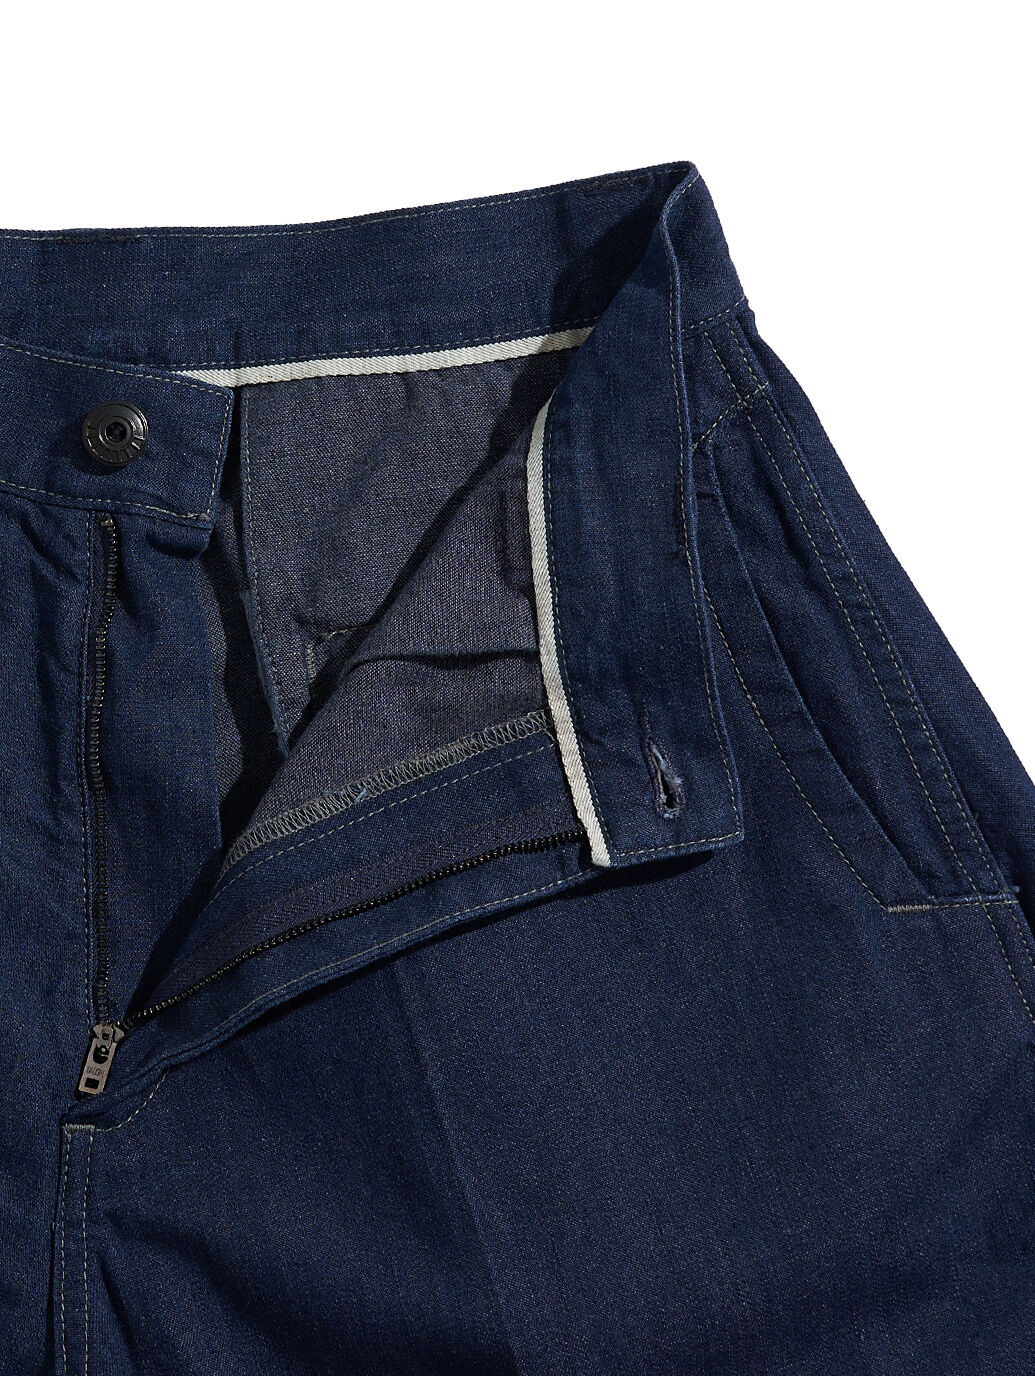 DENIM FAMILYBY LEVI'S® MADE&CRAFTED® ショートパンツ｜リーバイス 